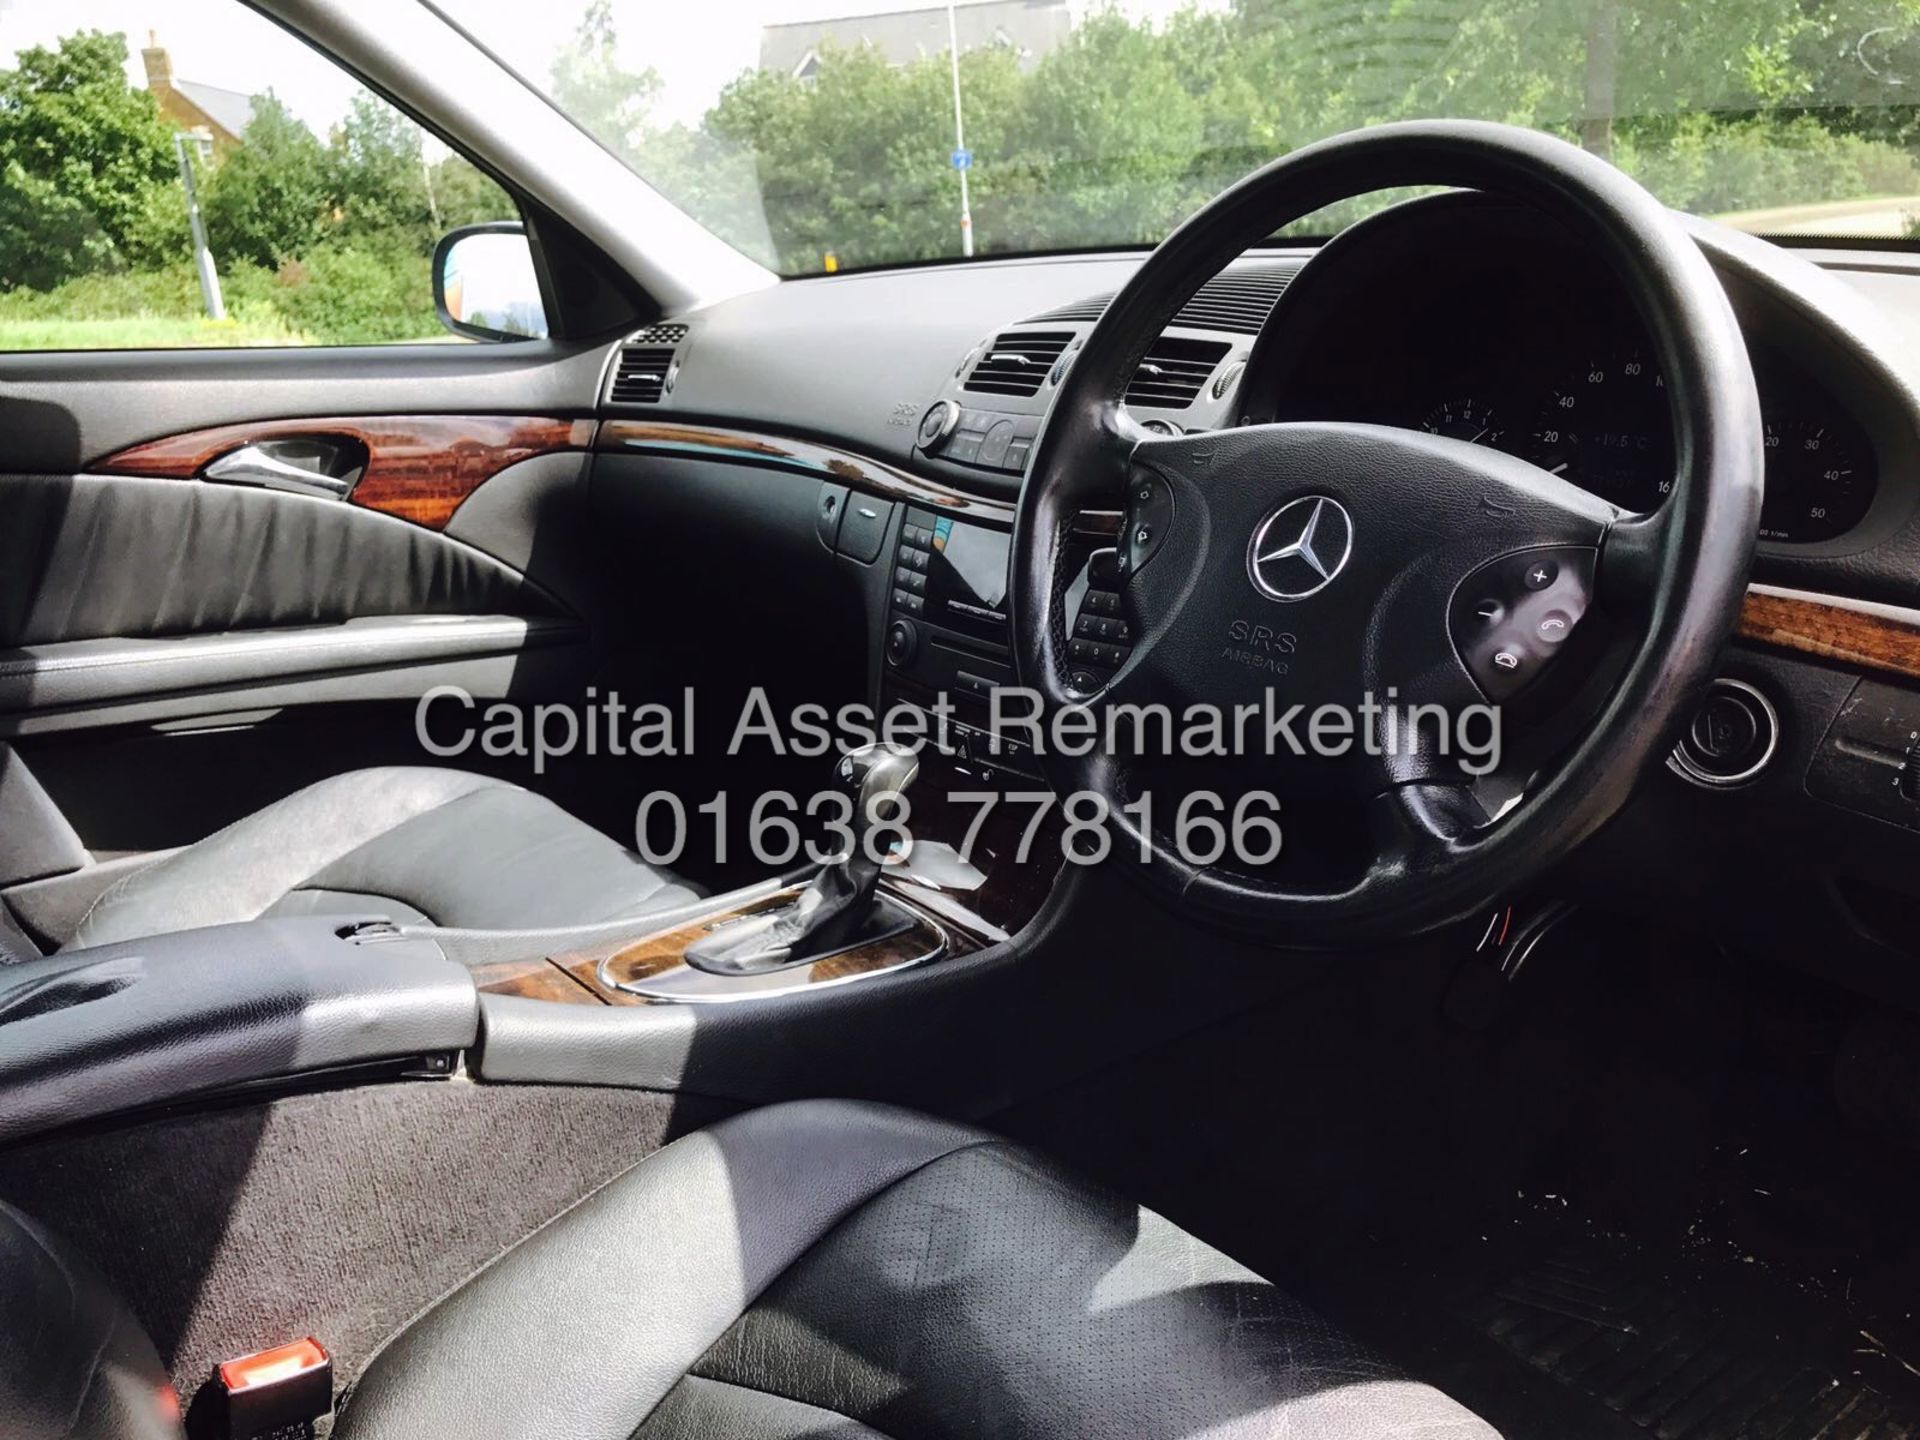 (ON SALE) E270CDI AUTOMATIC SALOON - AIR CON - MASSIVE SPEC - NEW SHAPE - NO VAT TO PAY - LEATHER - Image 7 of 14